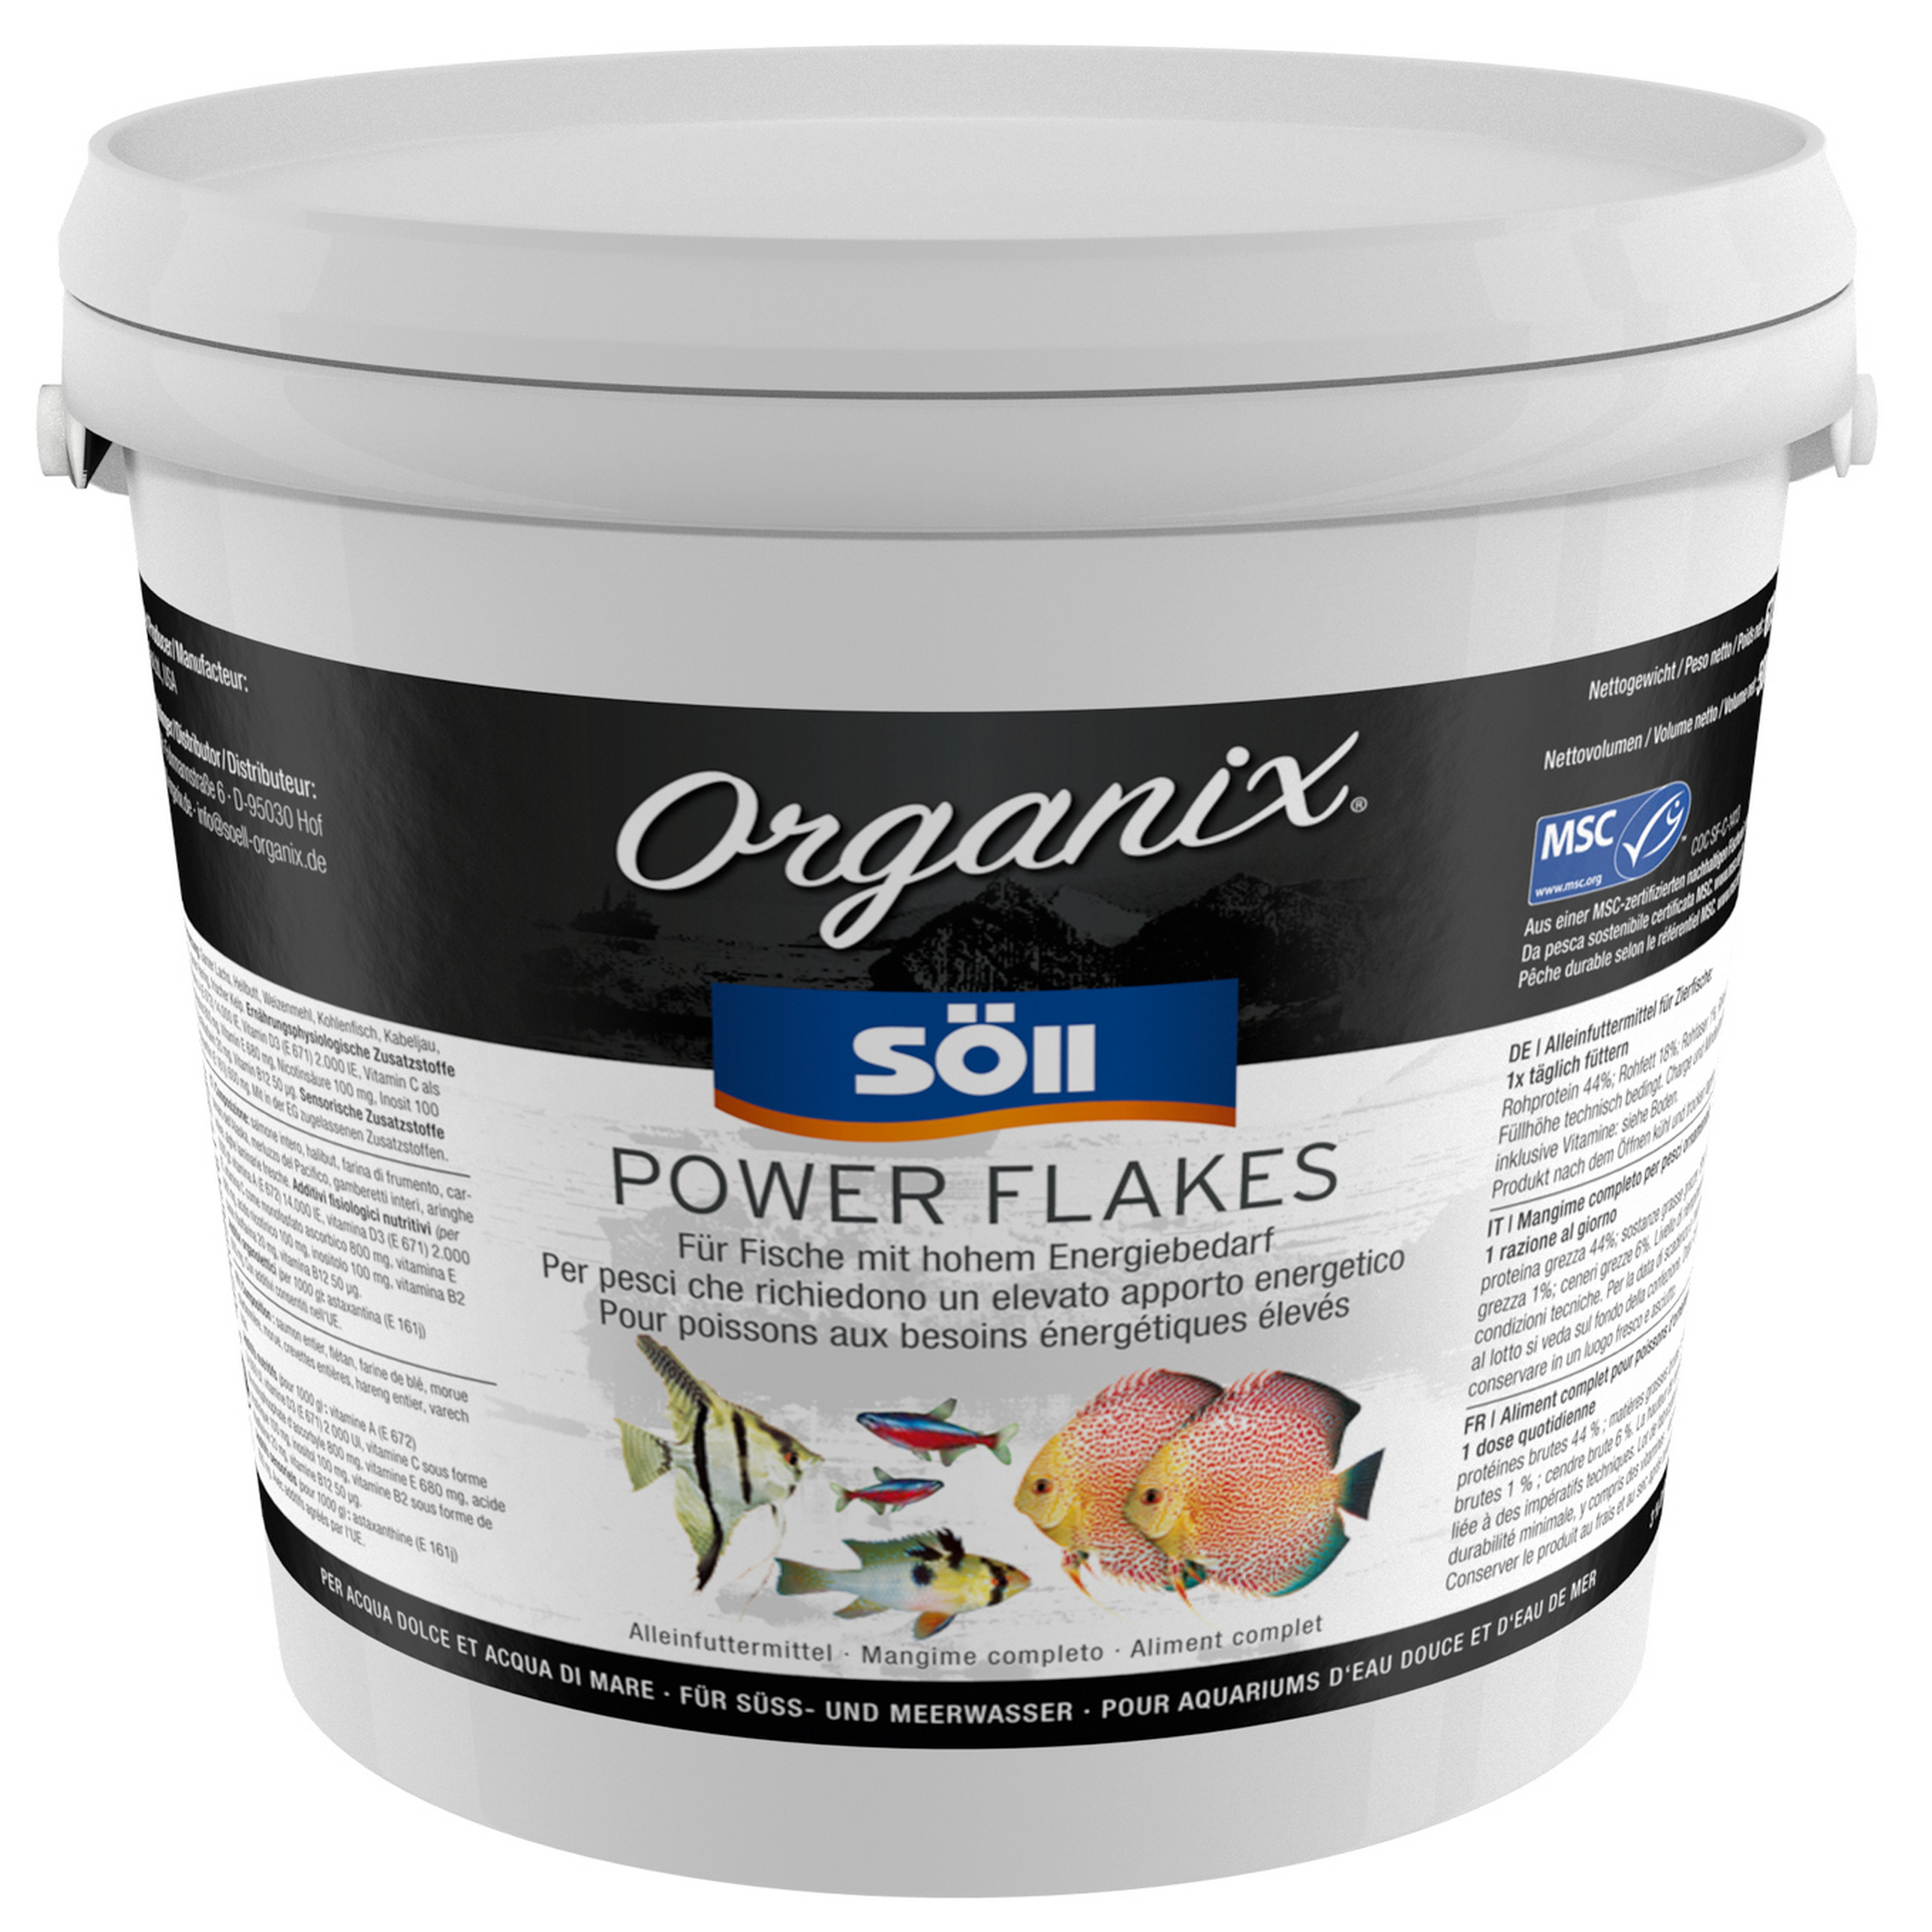 Organix Power Flakes 5 l + product picture